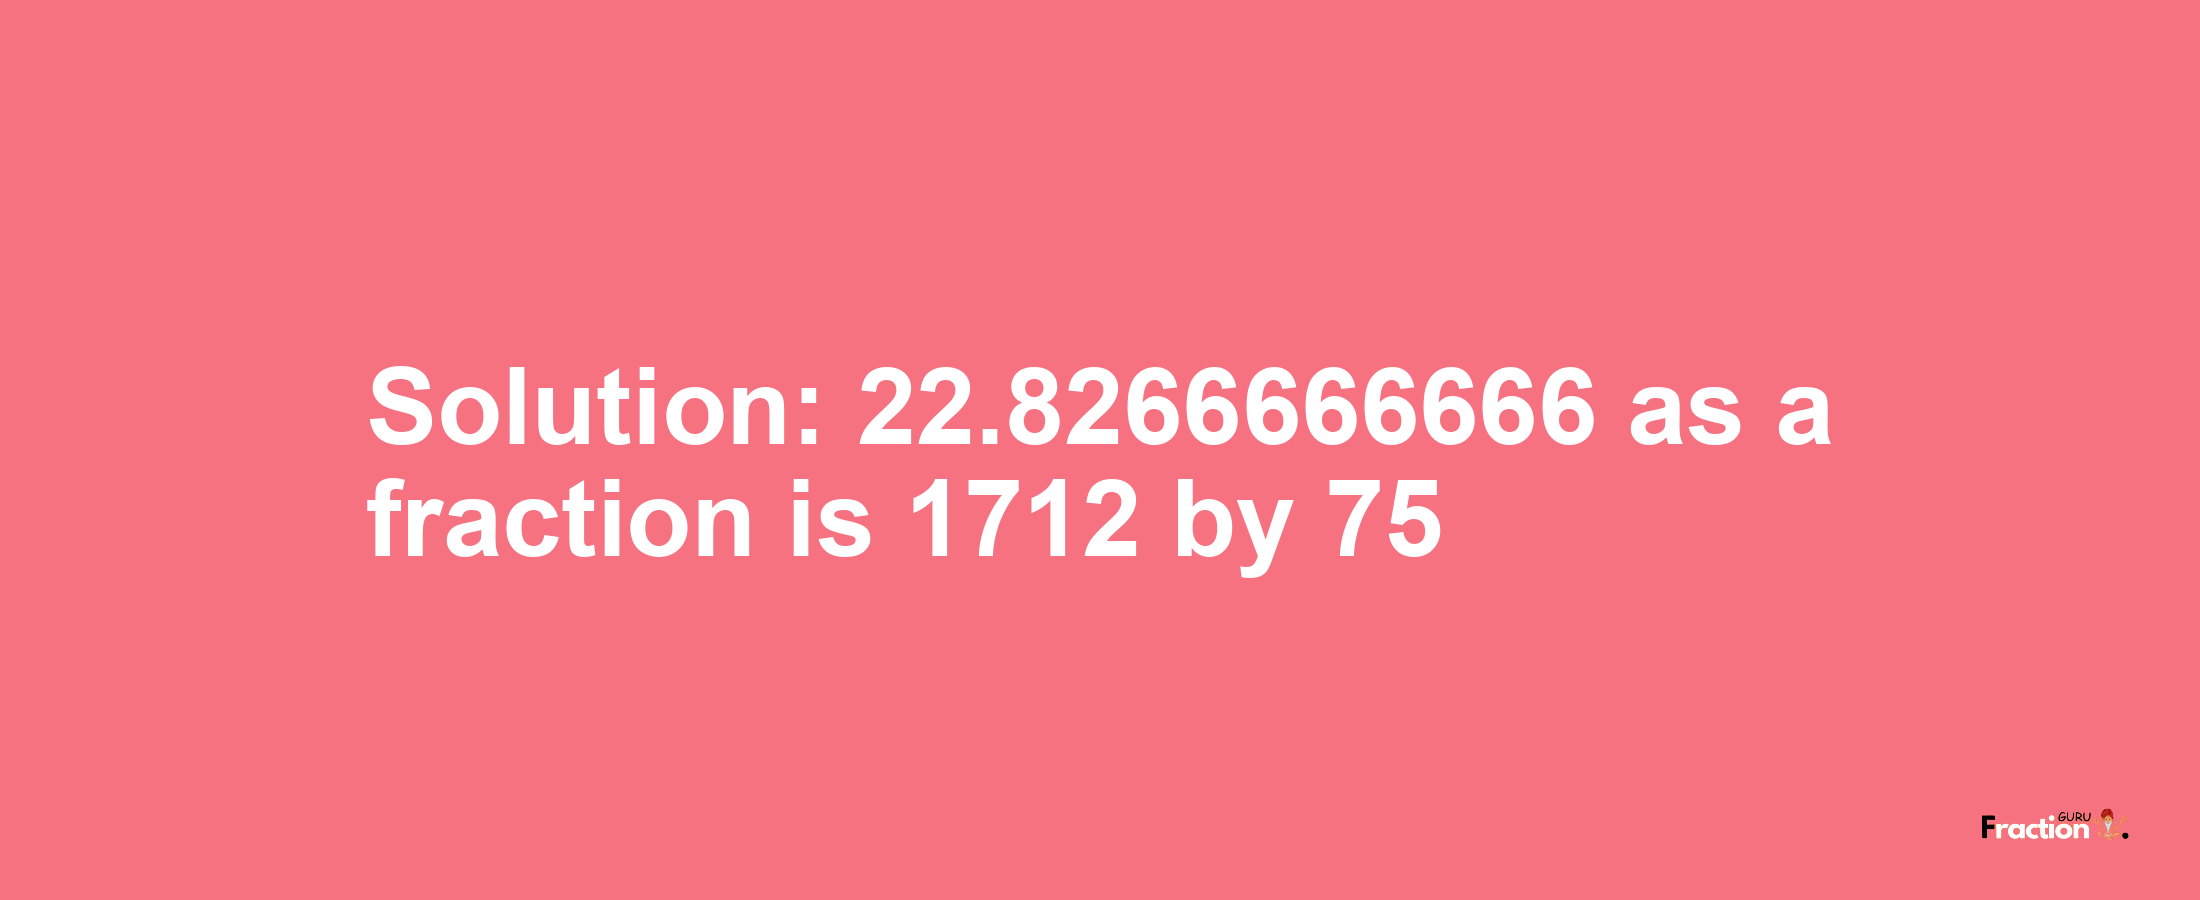 Solution:22.8266666666 as a fraction is 1712/75